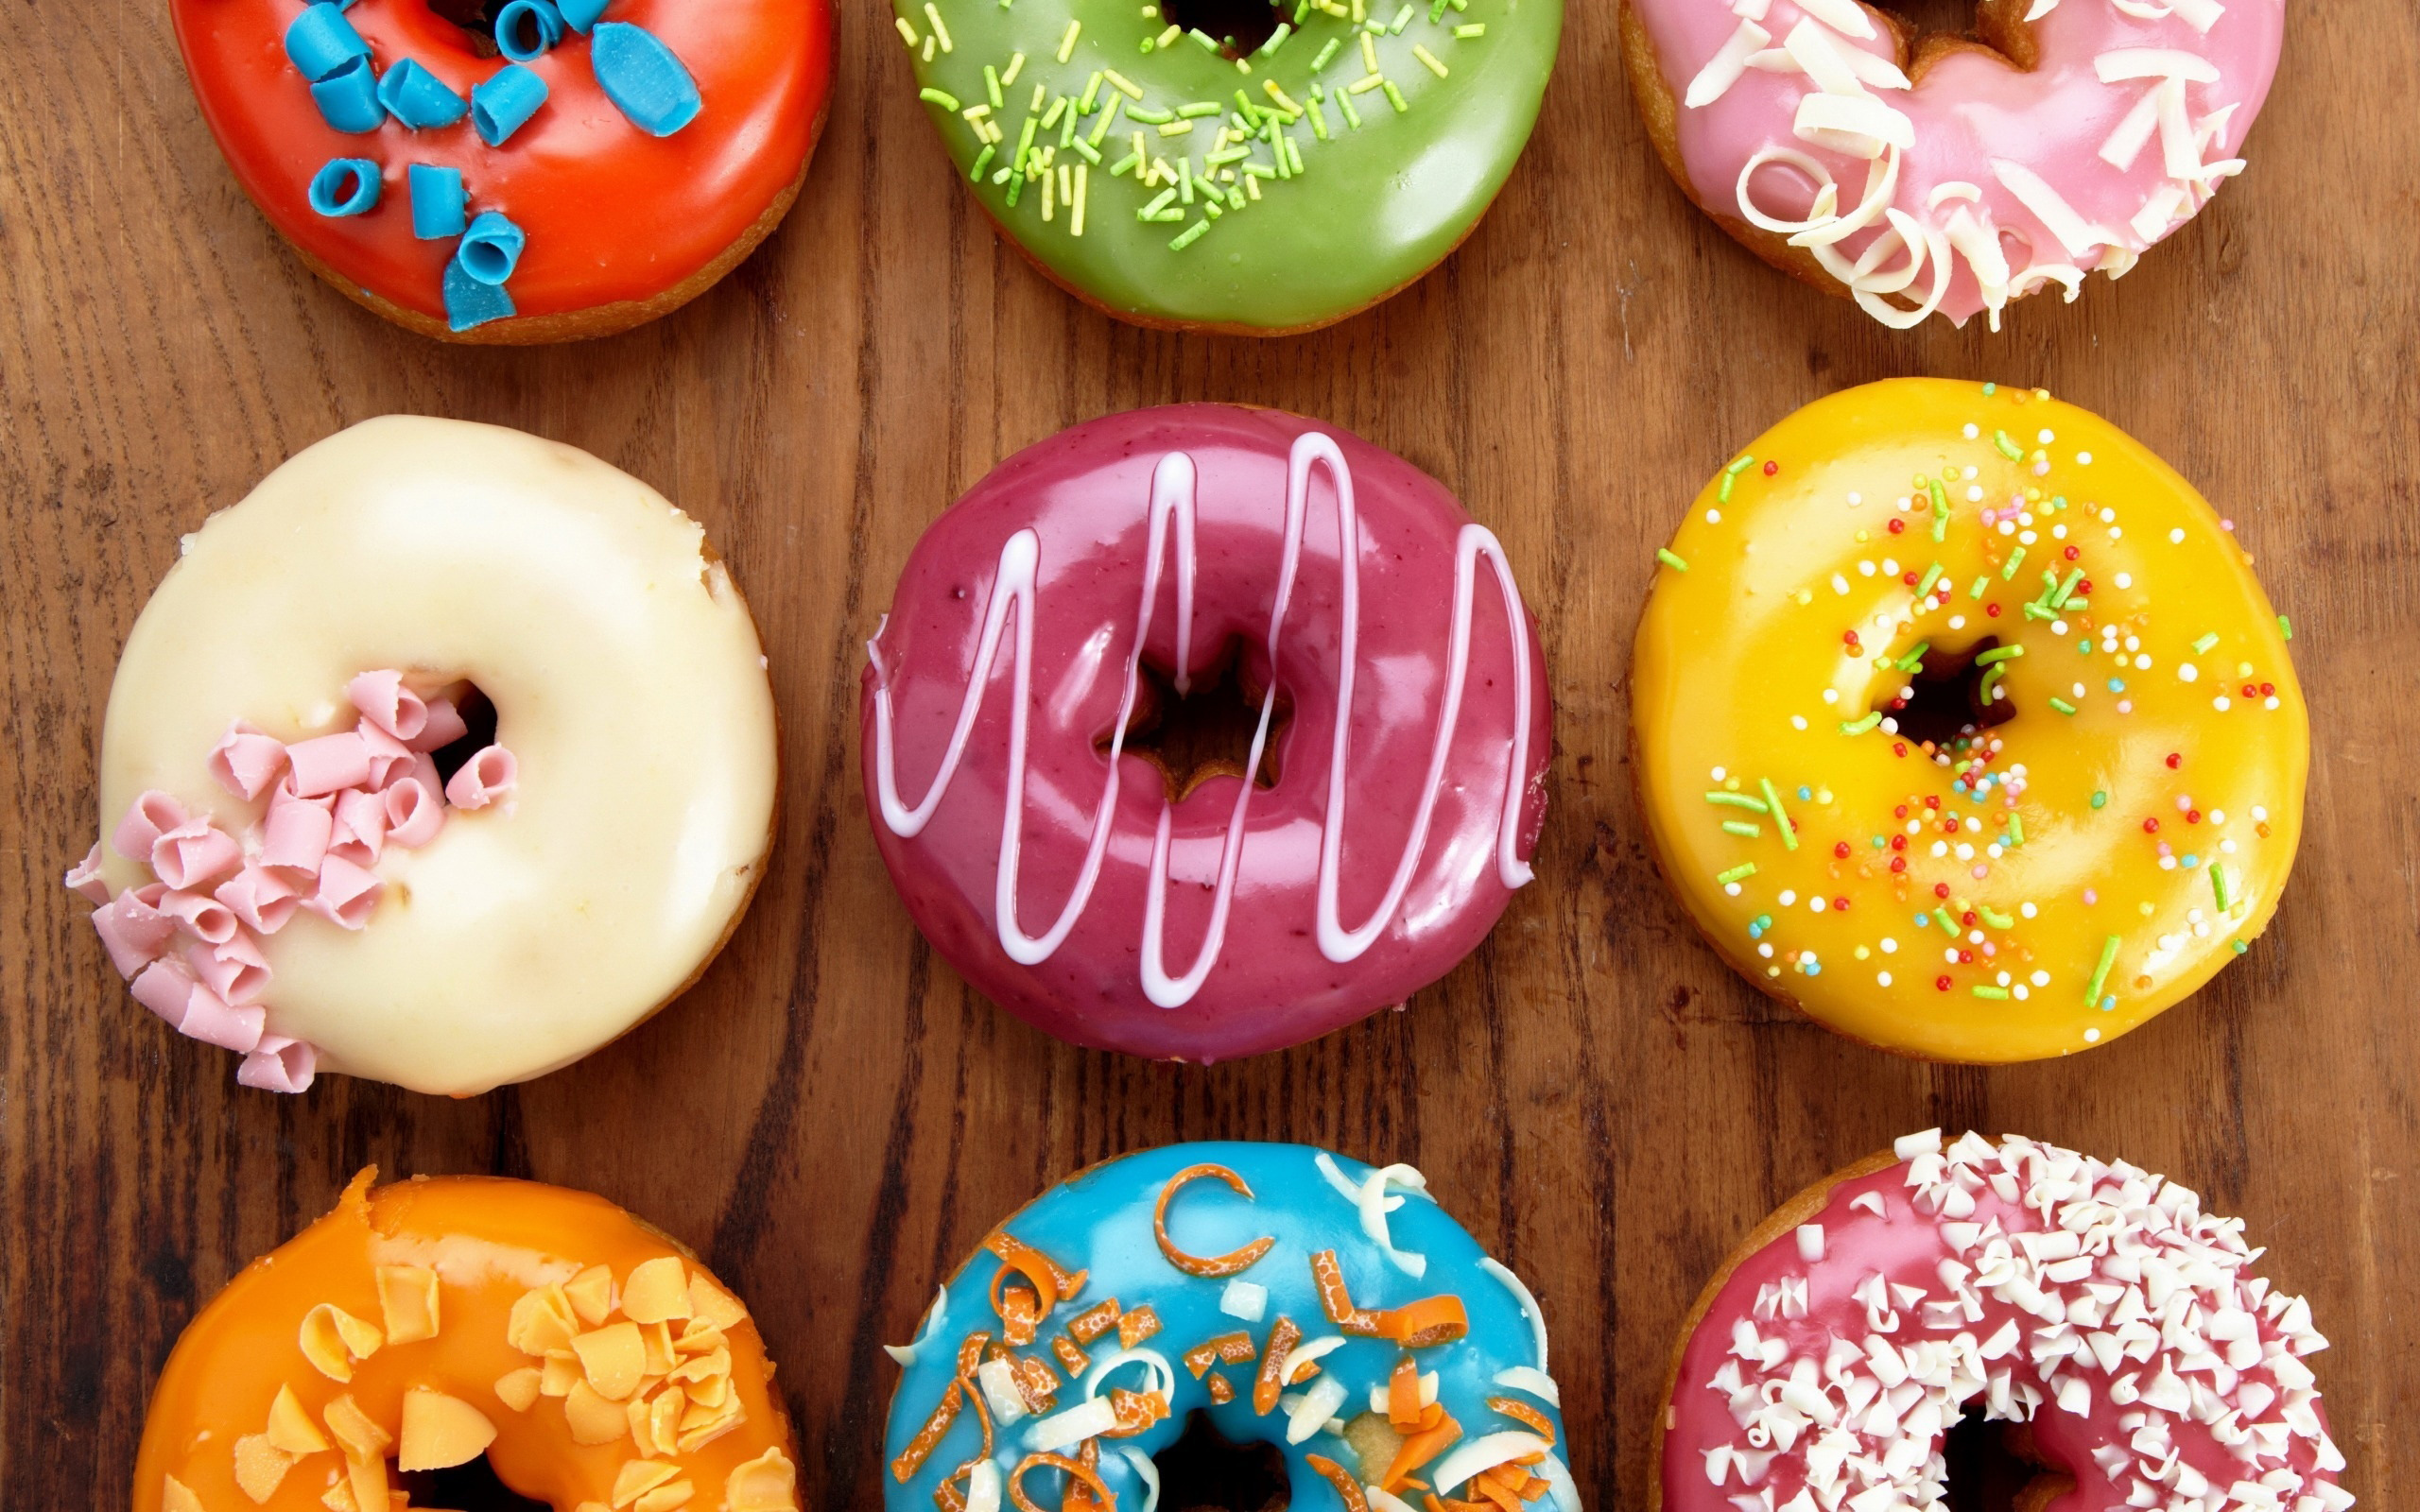 Glazed-Donuts-Colors-Wallpaper - Exceed Nutrition - Nutrition Tools For ...